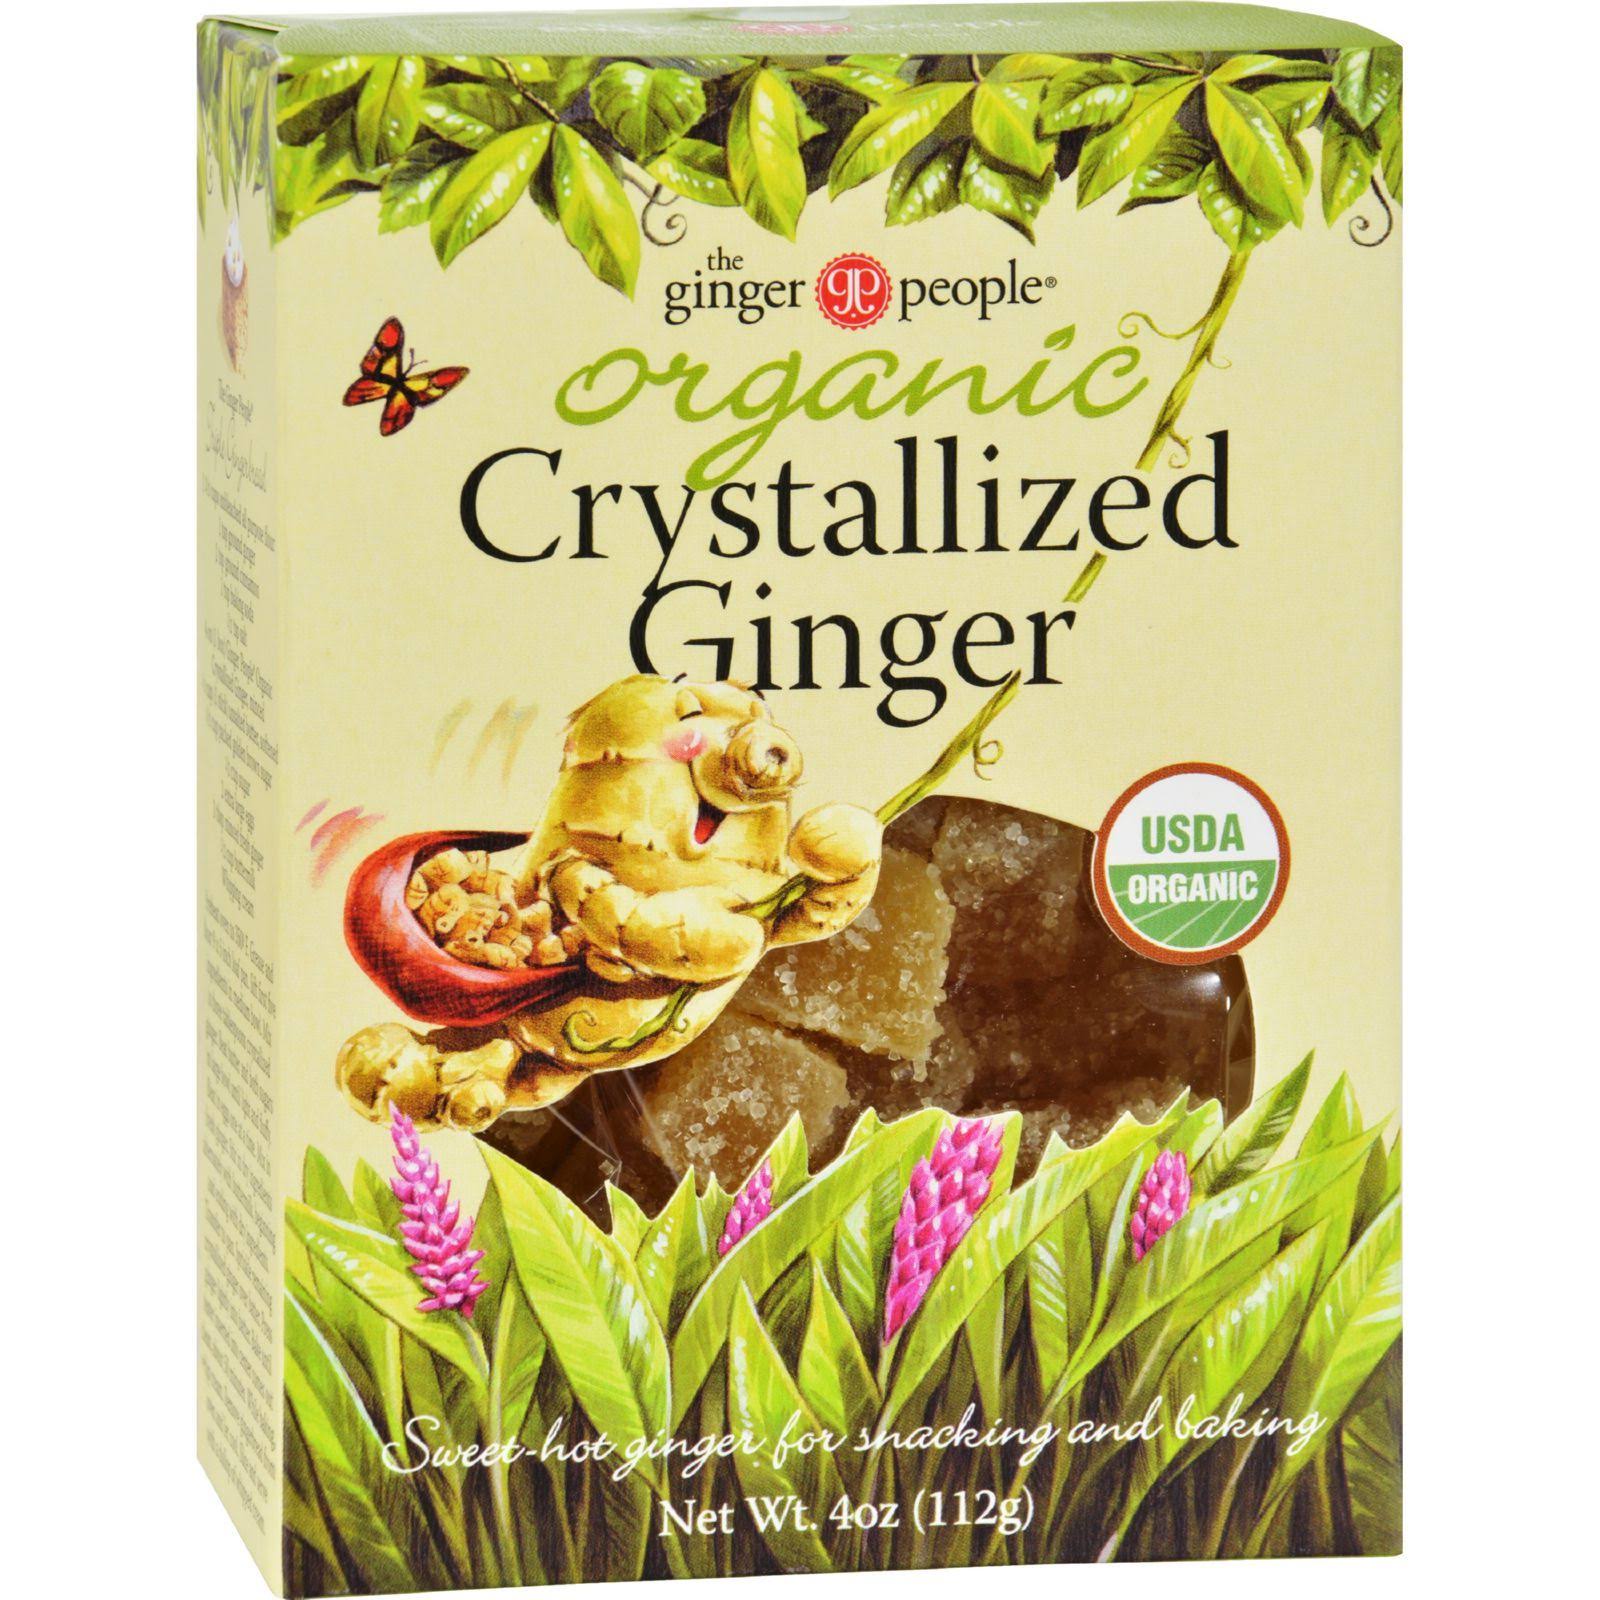 The Ginger People Organic Crystallized Ginger